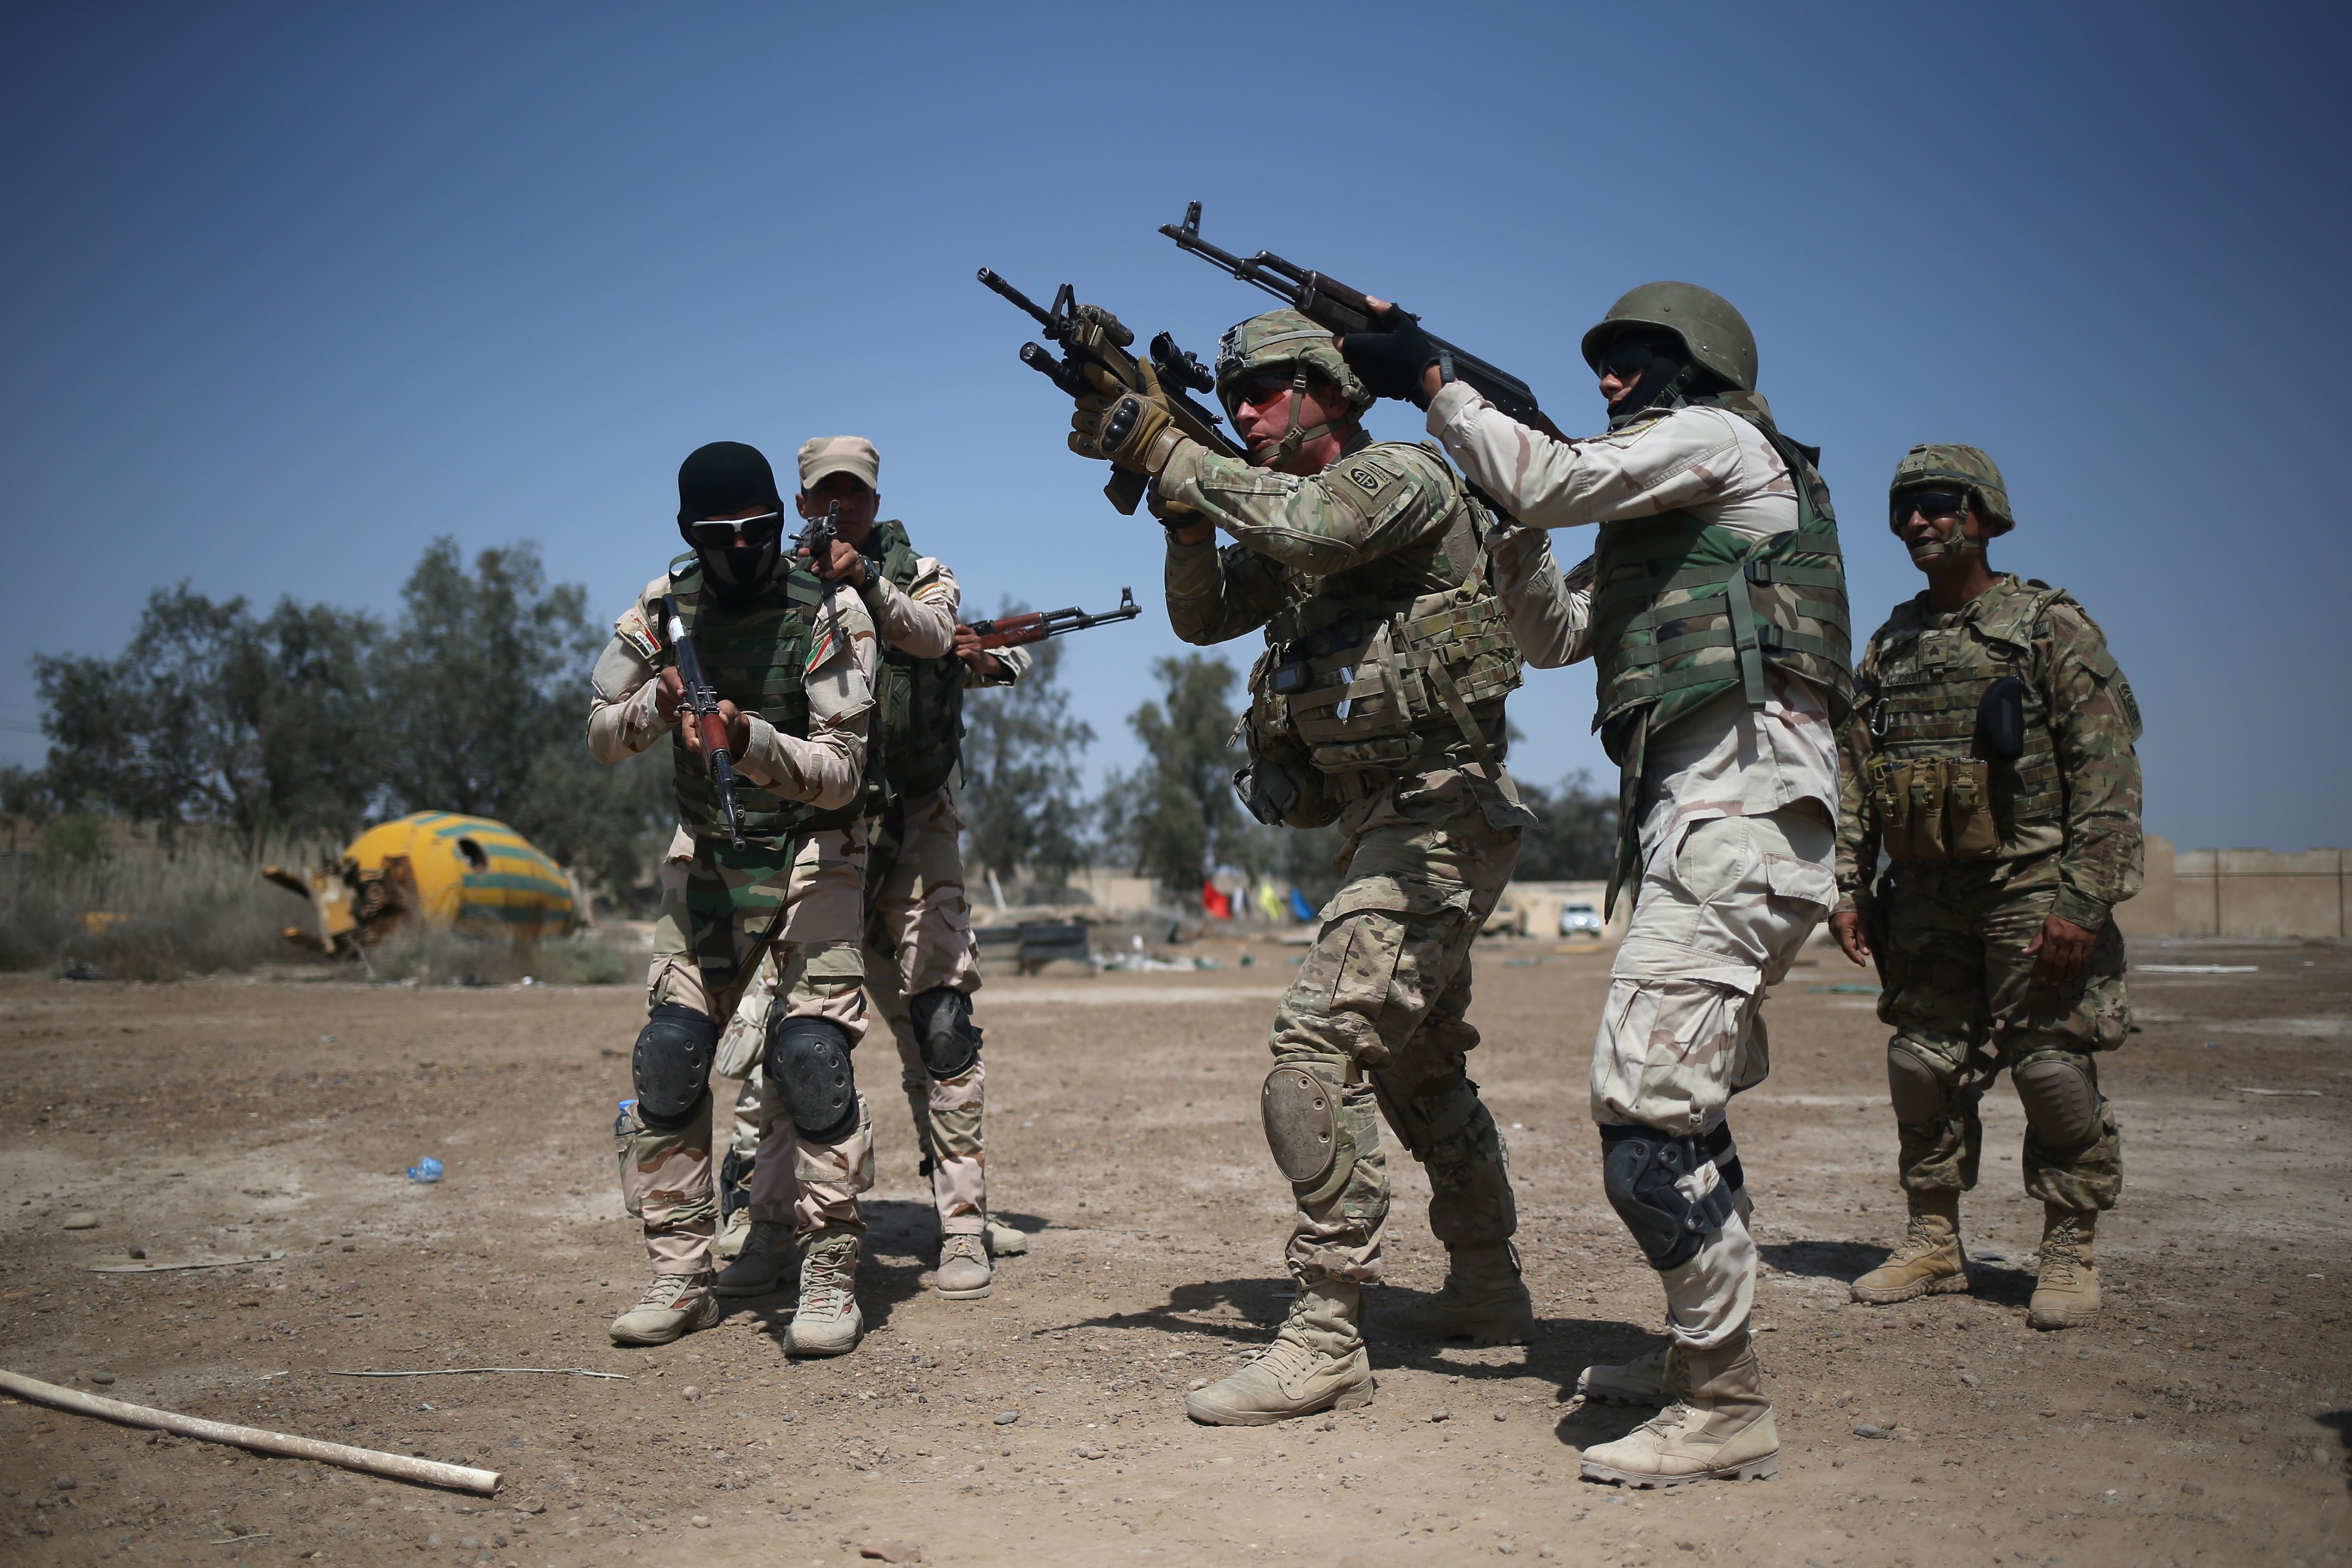 U.S. Army trainers instruct Iraqi Army recruits at a military base on April 12, 2015 in Taji, Iraq. (John Moore—Getty Images)